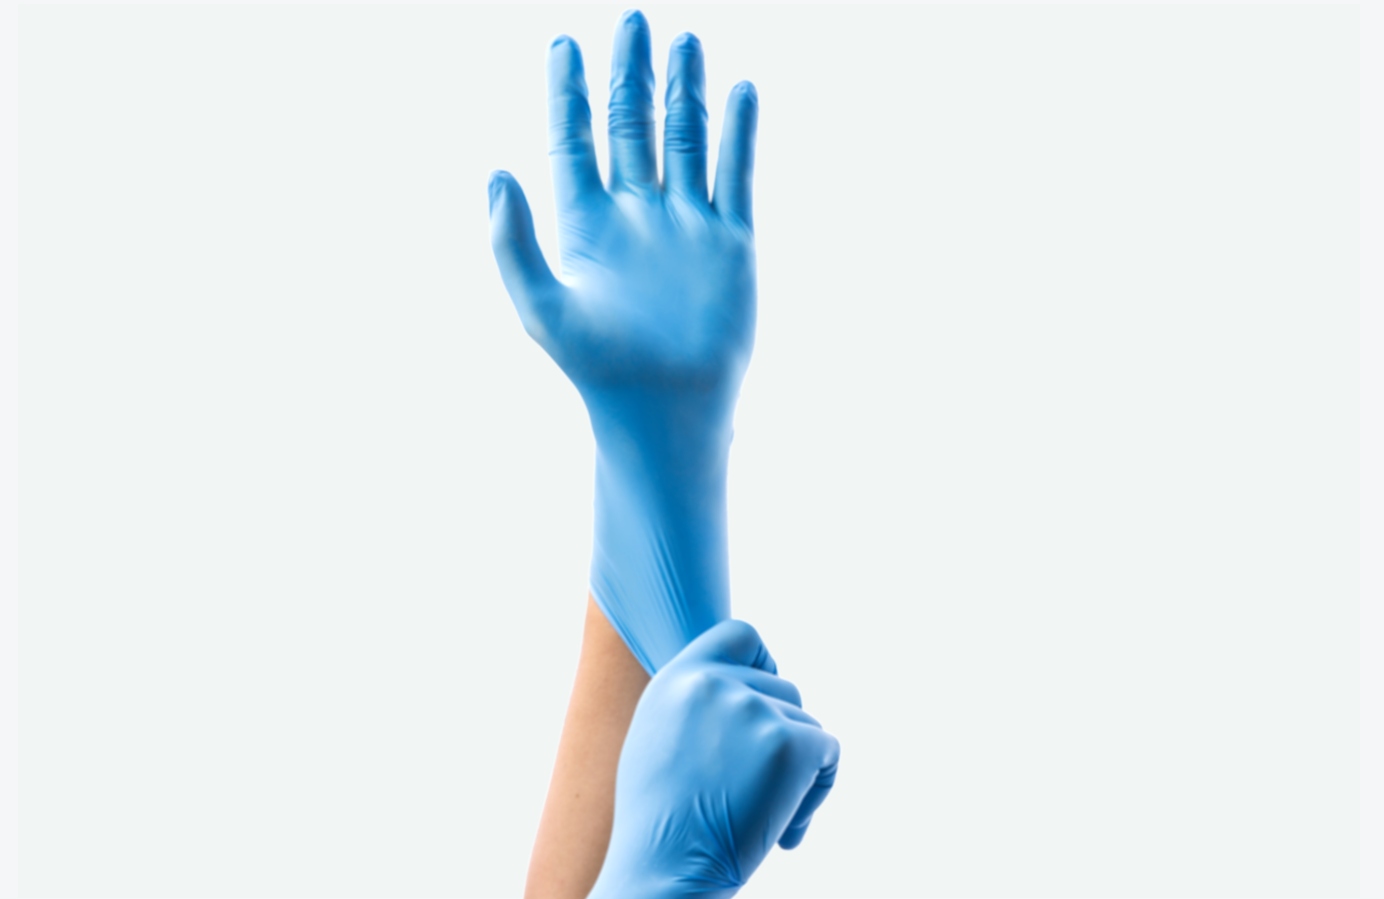 Synmax gloves are widely used in industrial settings due to their robust protective qualities.